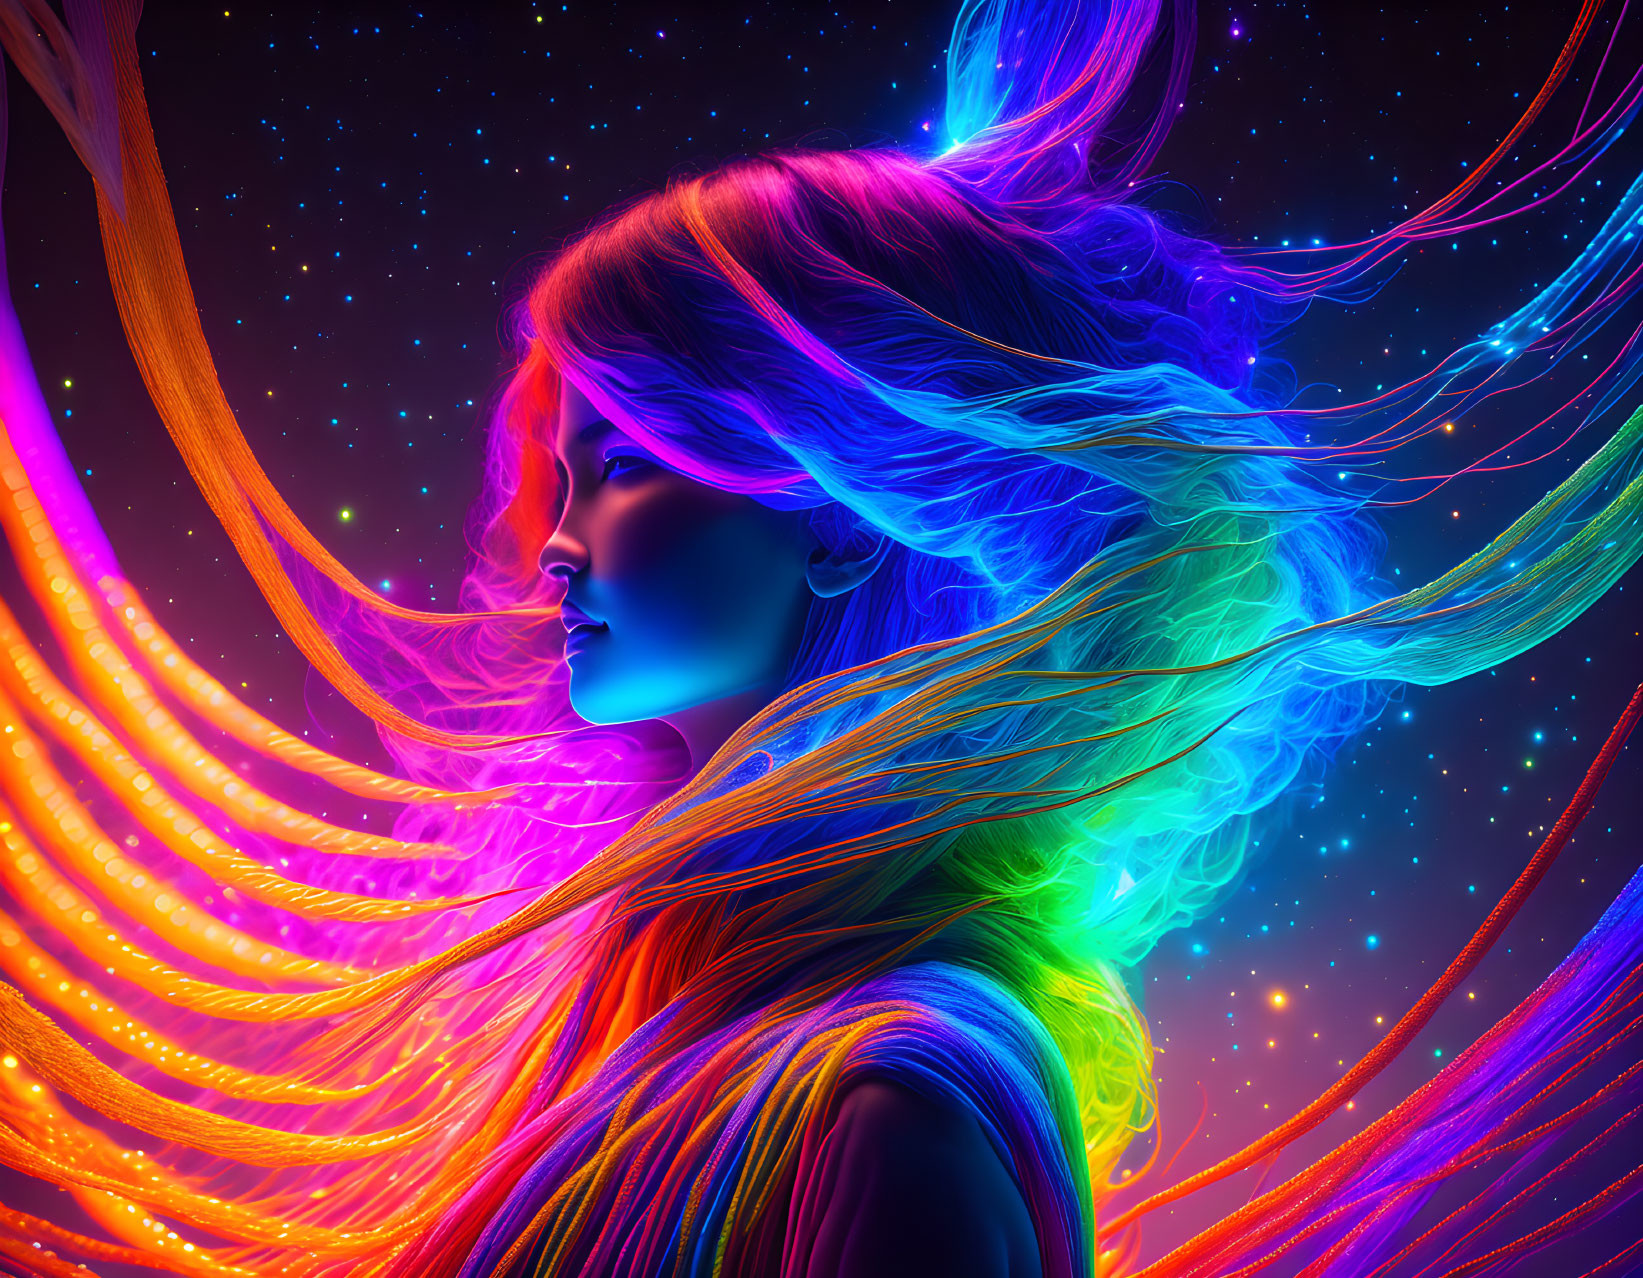 Colorful flowing hair merges with cosmic background in vibrant profile.